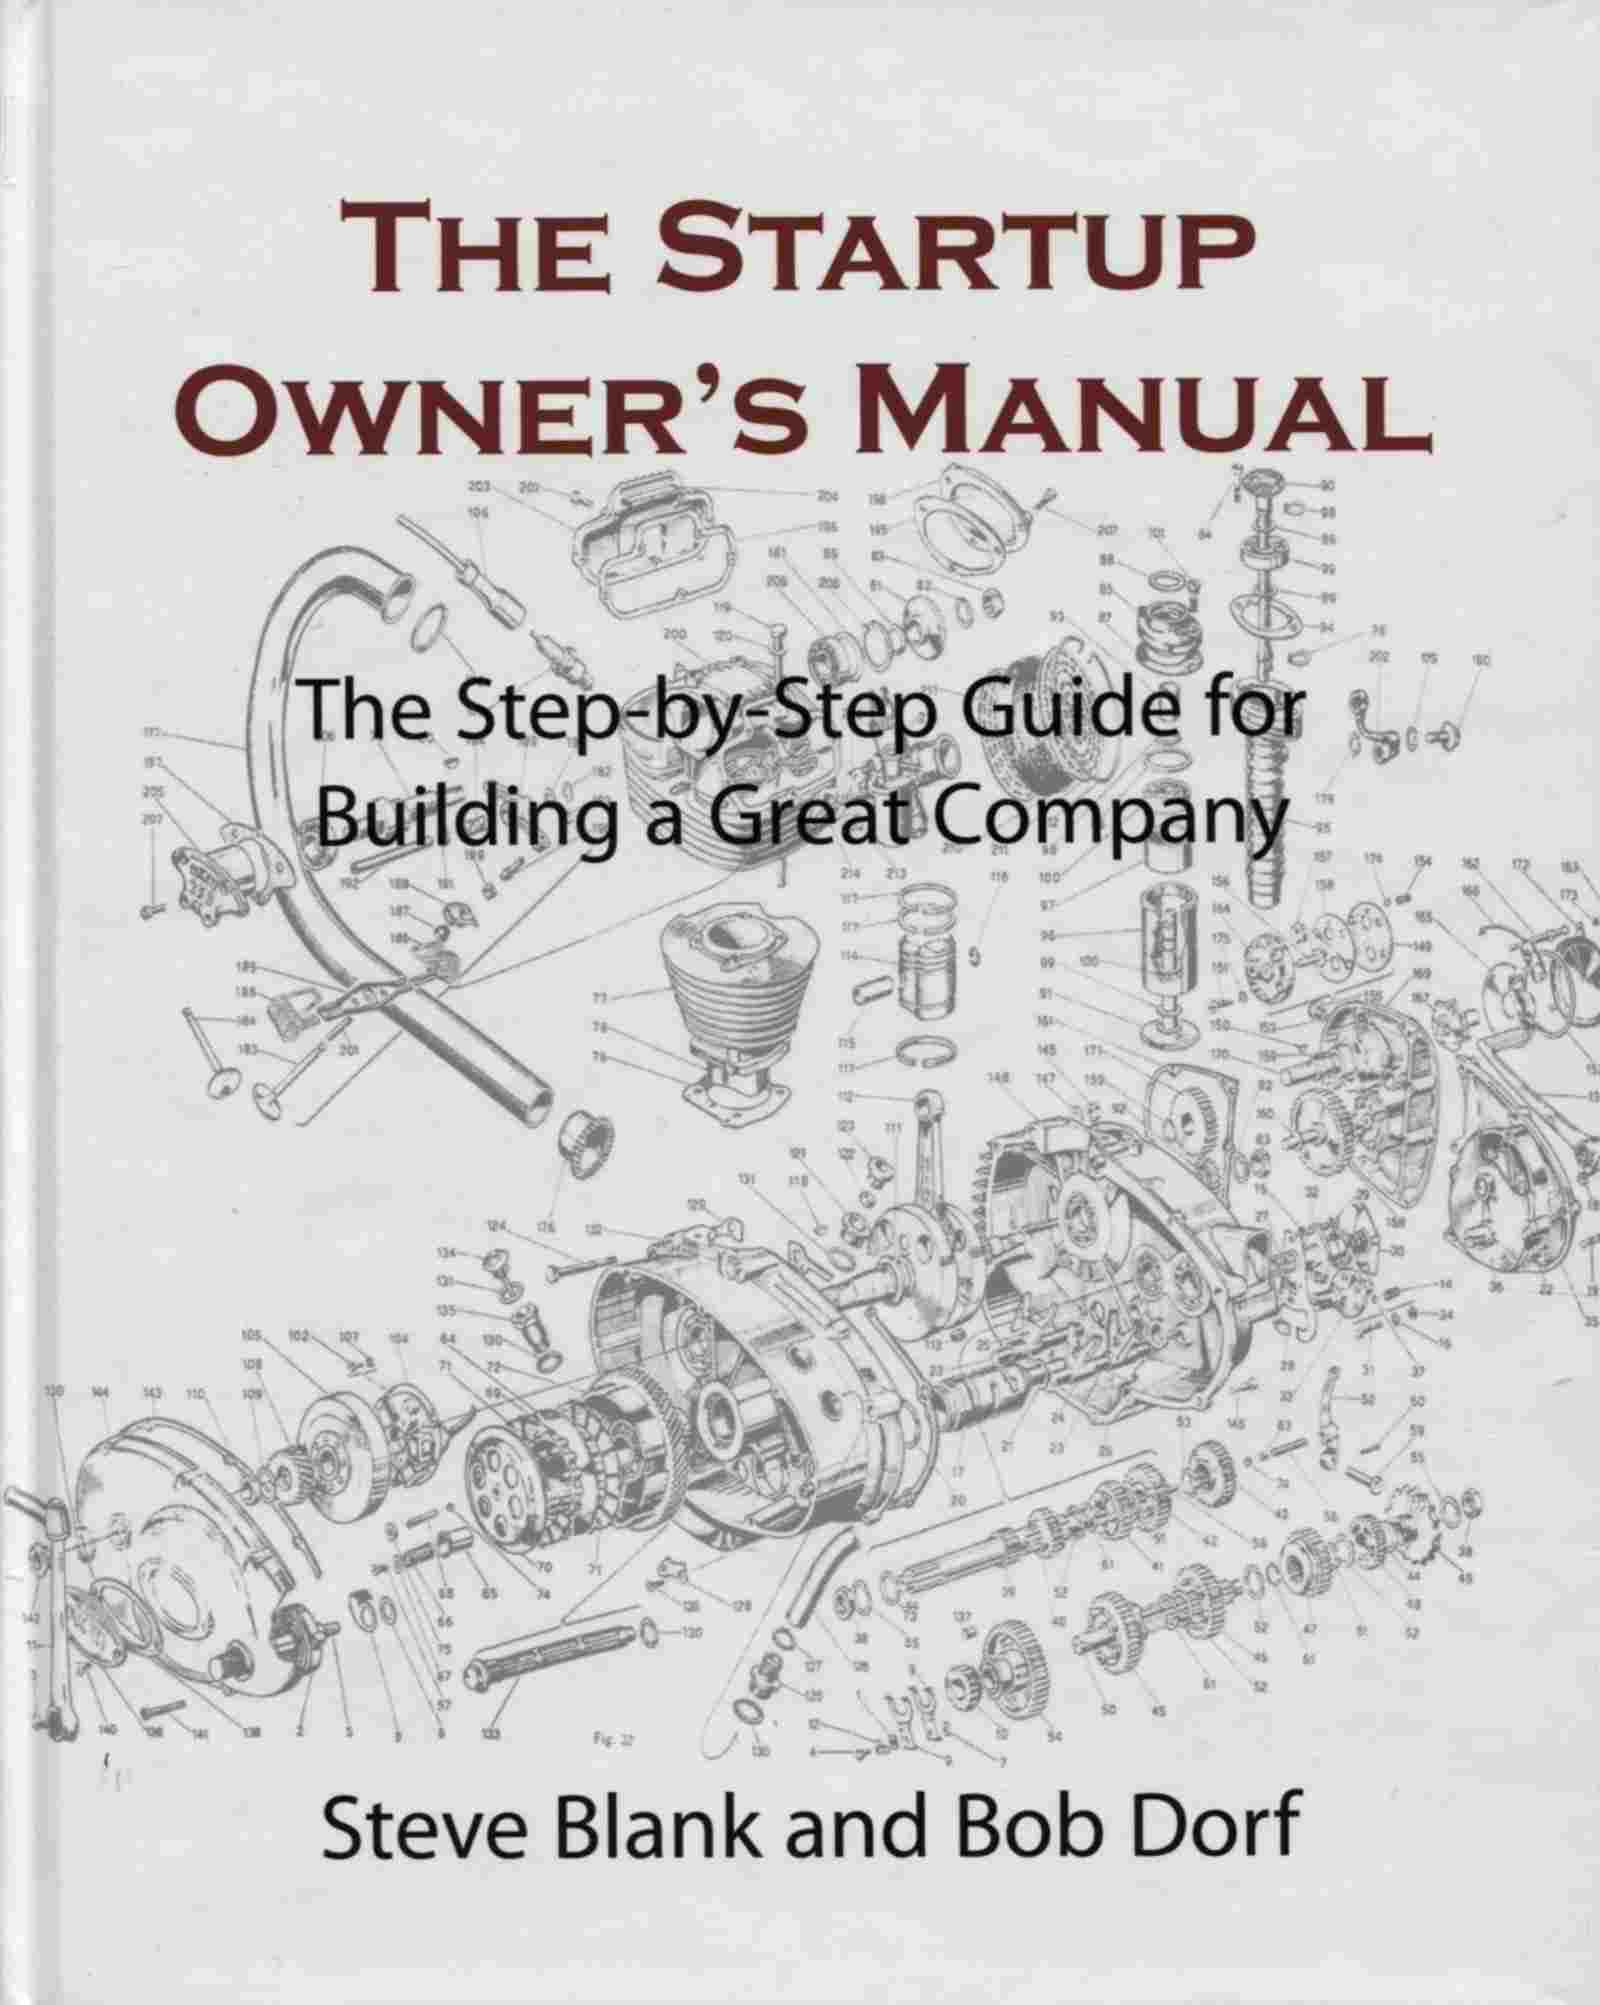 The startup owner's manual